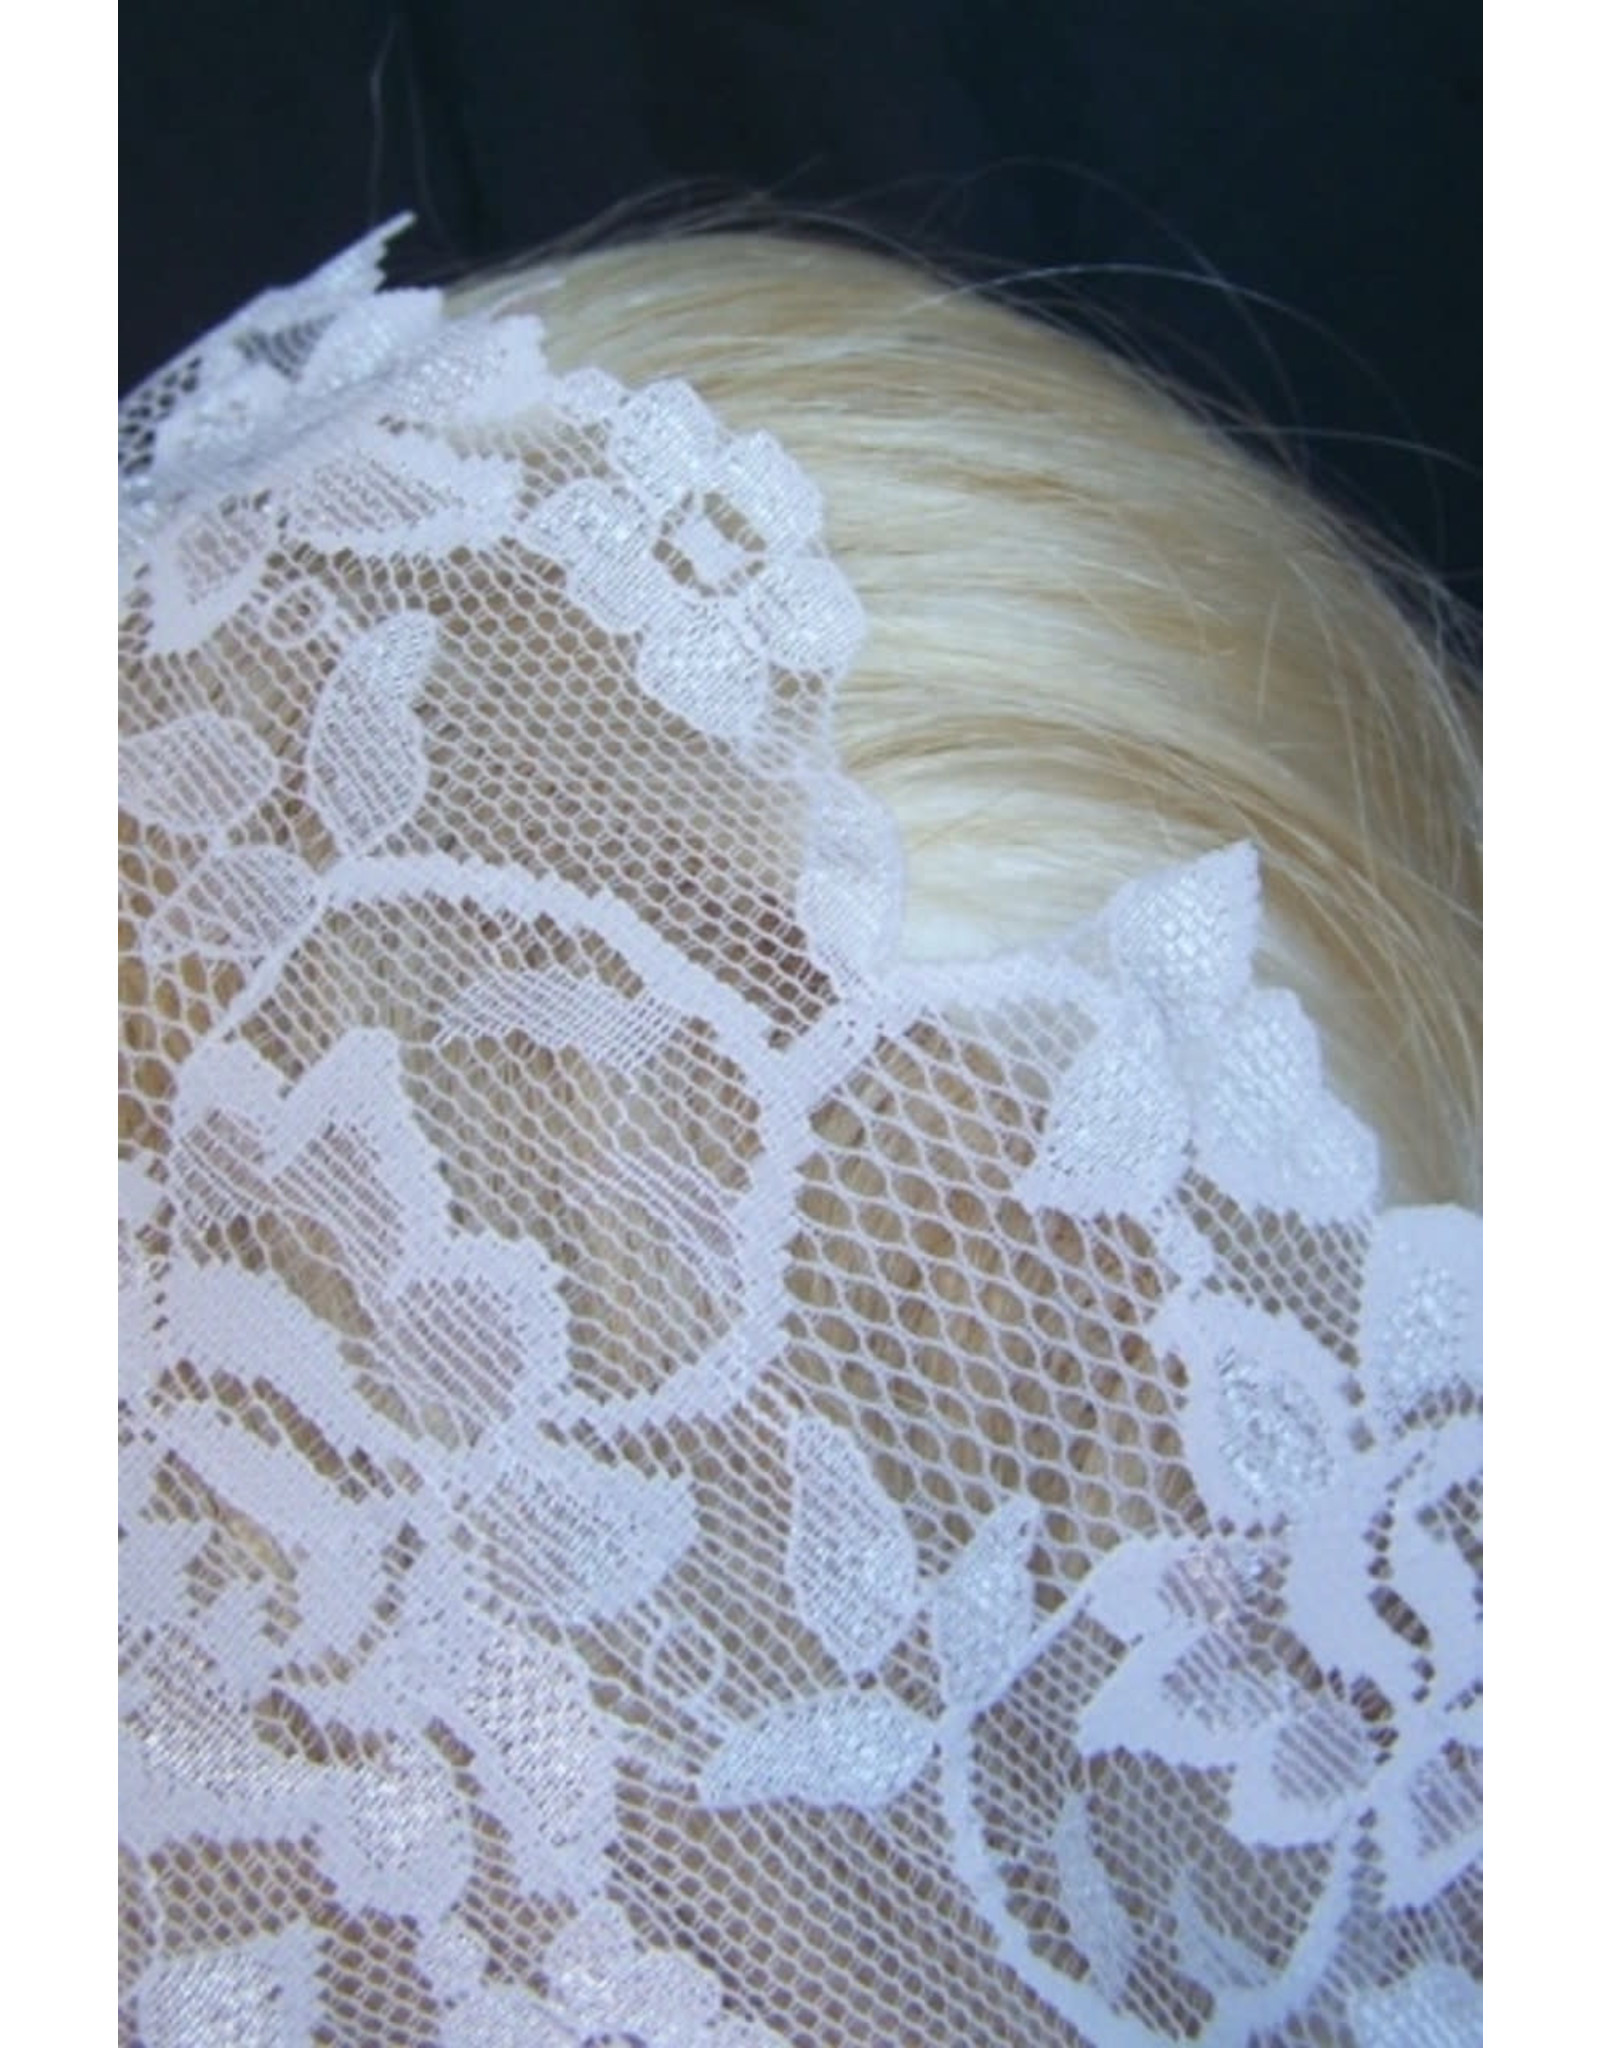 Veils by Lily Veil - White Floral Lace Mantilla with Longer Sides